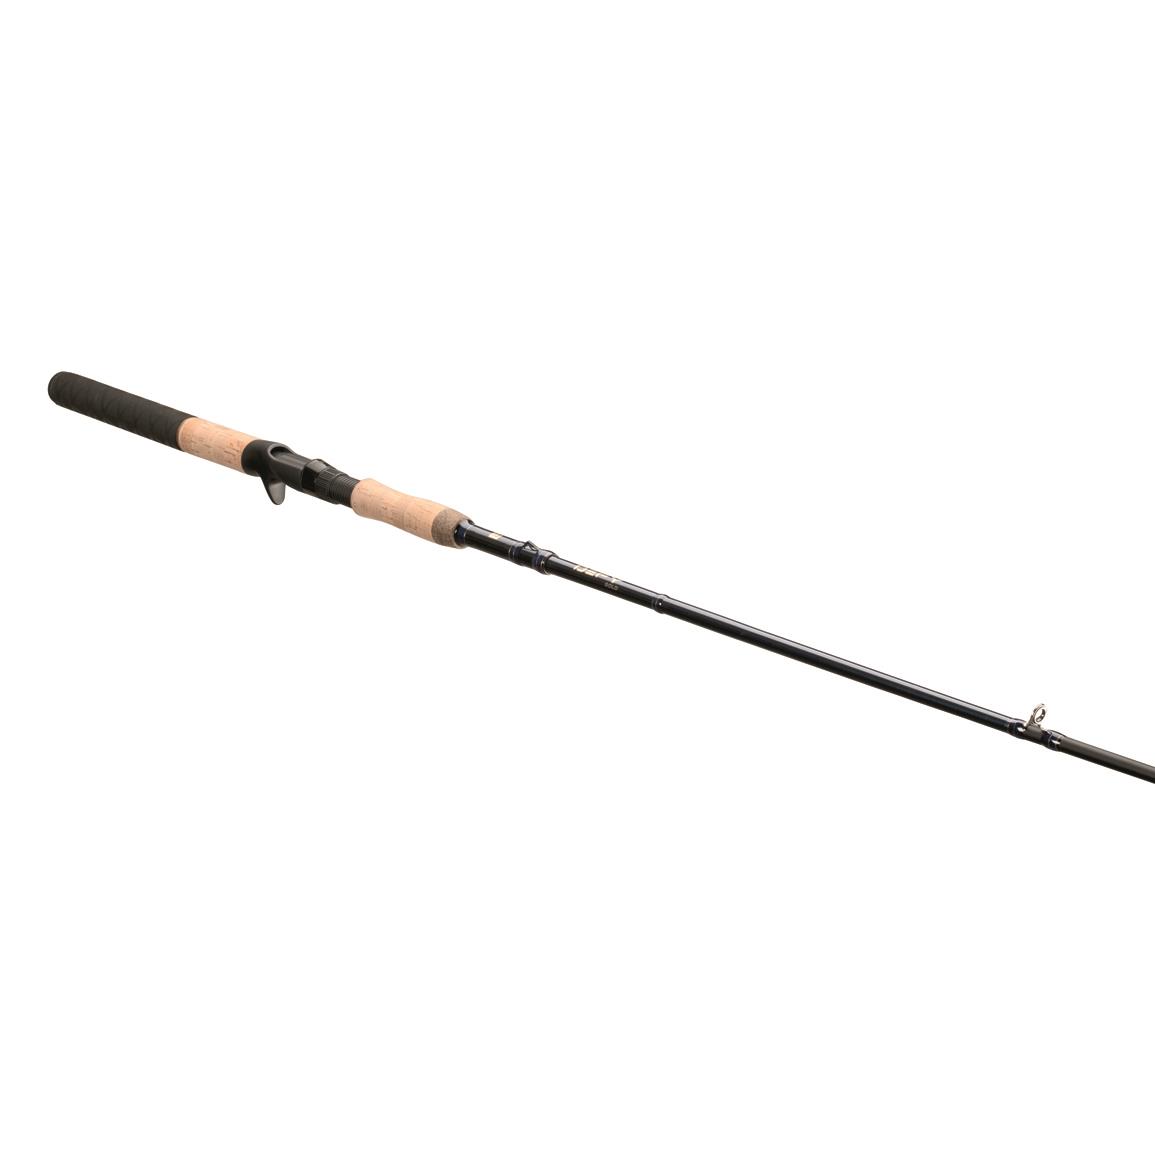 Fenwick Eagle Ice Fishing Rod - 717825, Ice Fishing Rods at Sportsman's  Guide